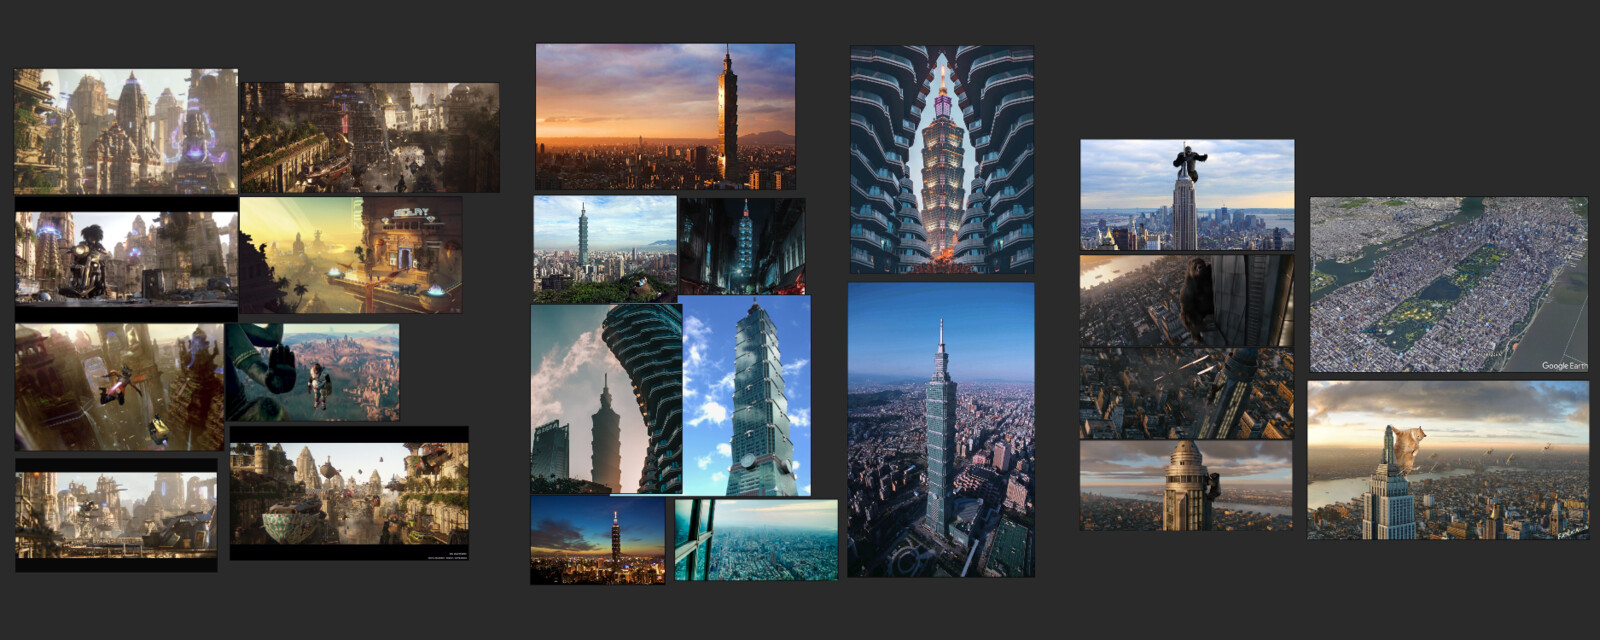 Our inspirations. On the left, you can see some pics from the trailer of Beyond Good and Evil 2. On the middle, there are some pictures of Taiwan and the famous tower Taipei 101. On the right, some inspirations of the Movie King Kong and New York.